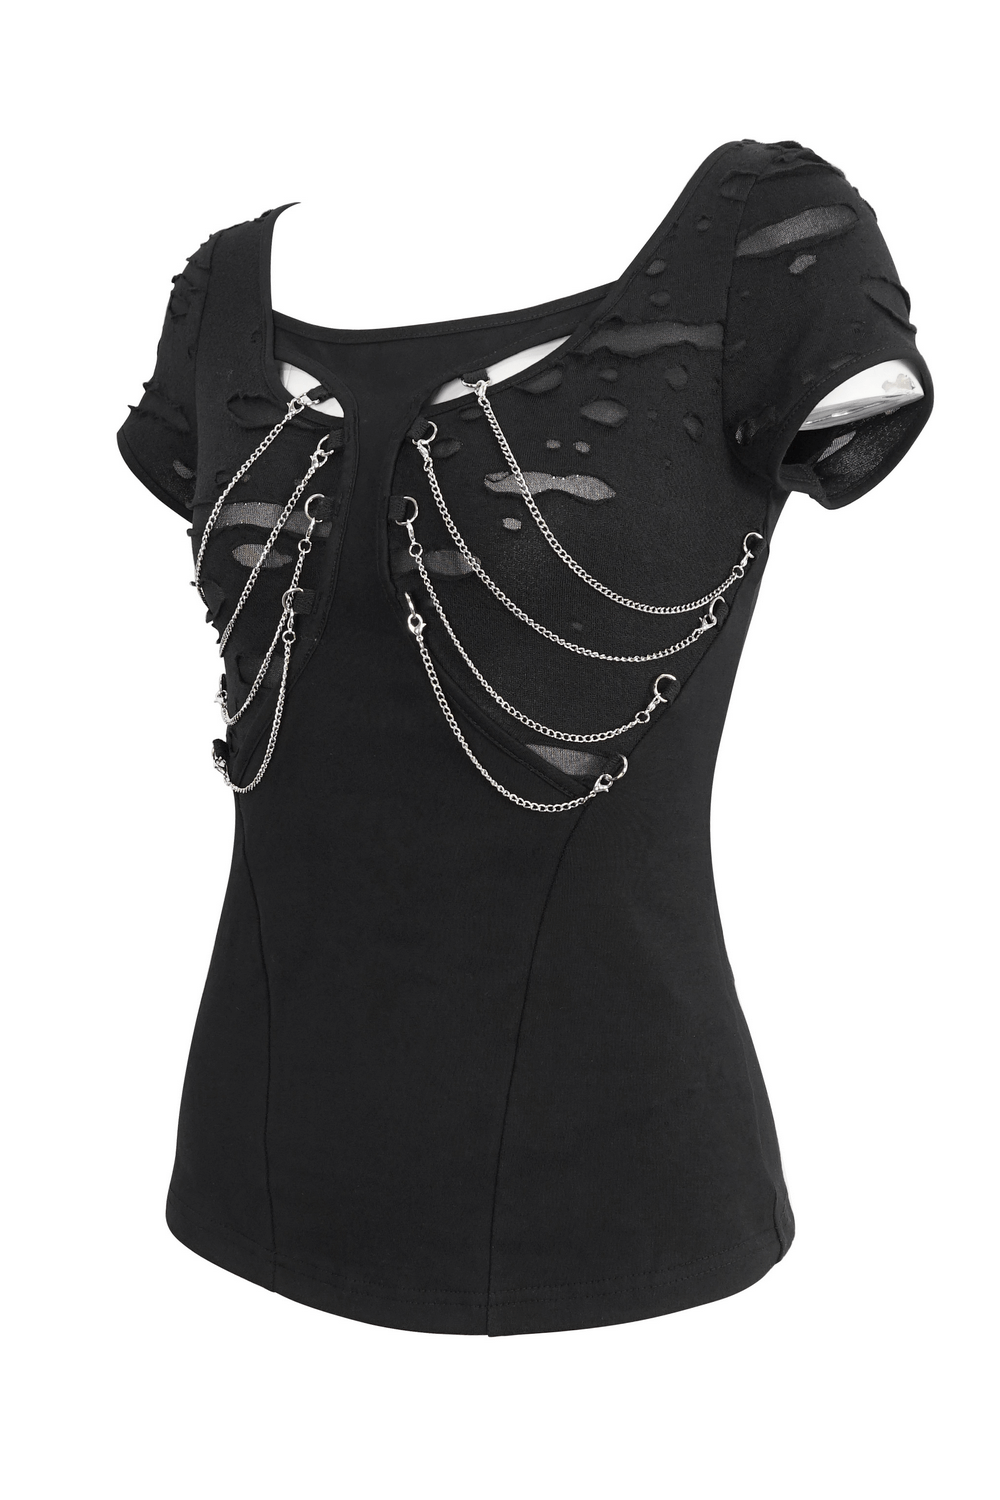 Chic Ripped Black T-Shirt with Elegant Chain Accent